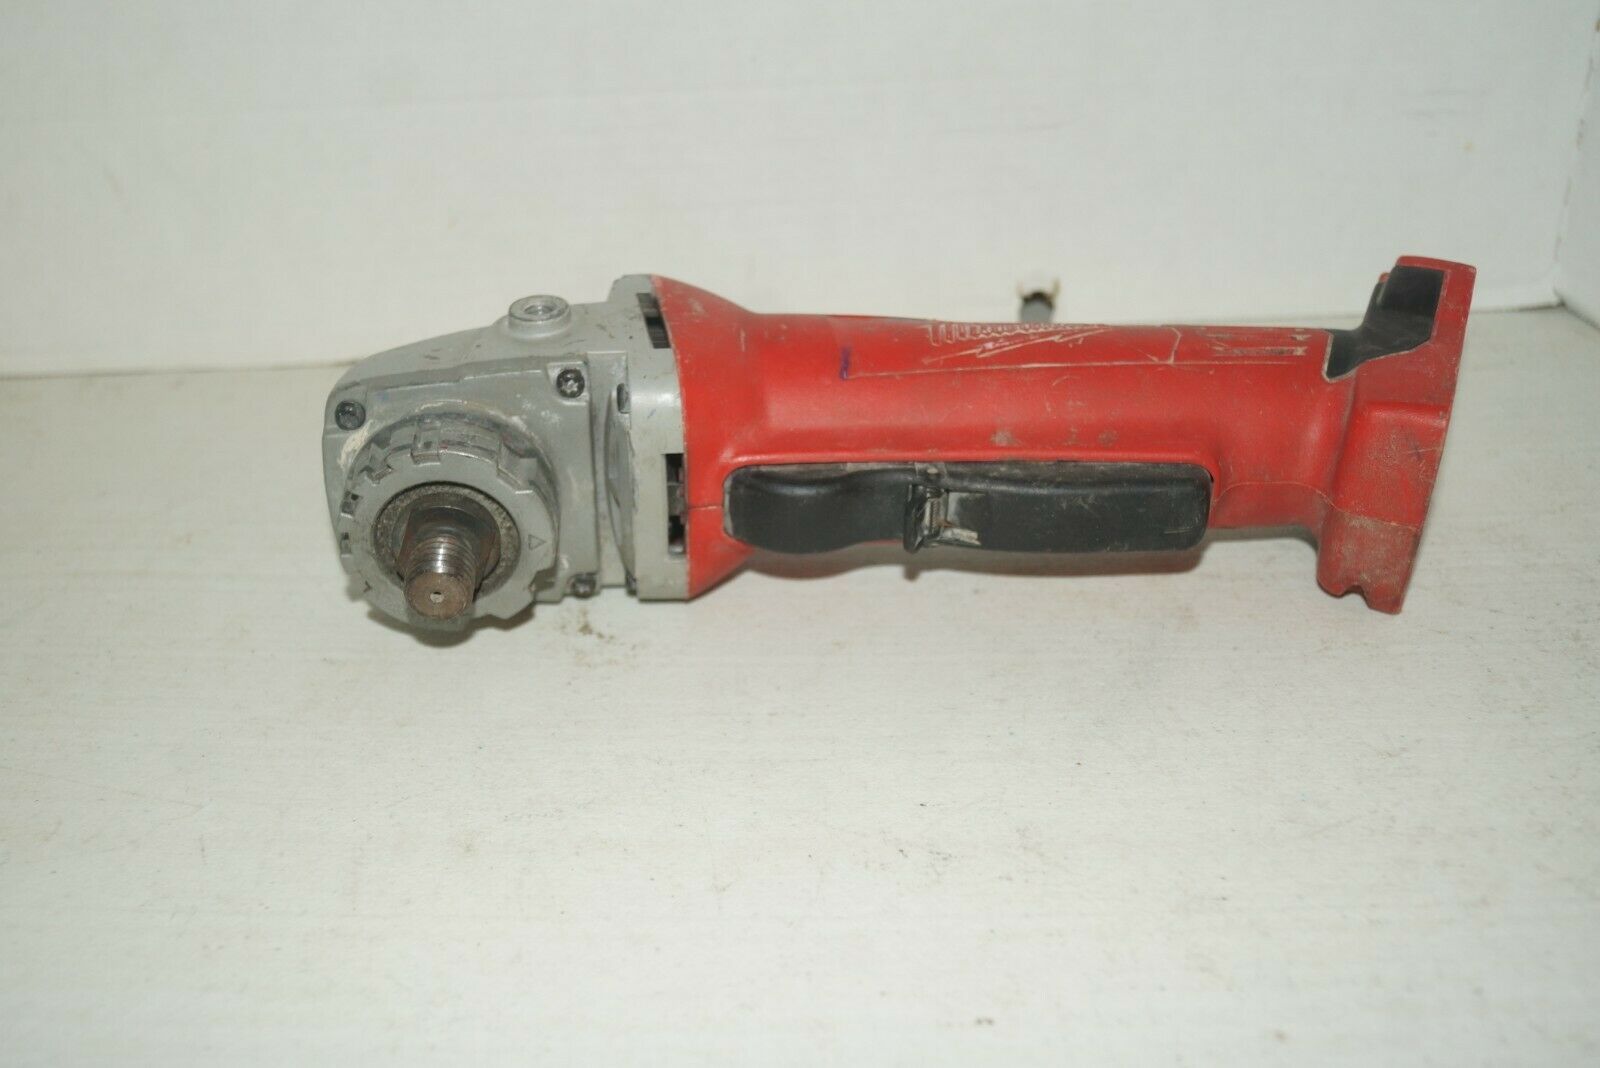 Details about   FOR PARTS NOT WORKING Milwaukee 2680-20 18-Volt Cordless 4-1/2" Grinder FP22 